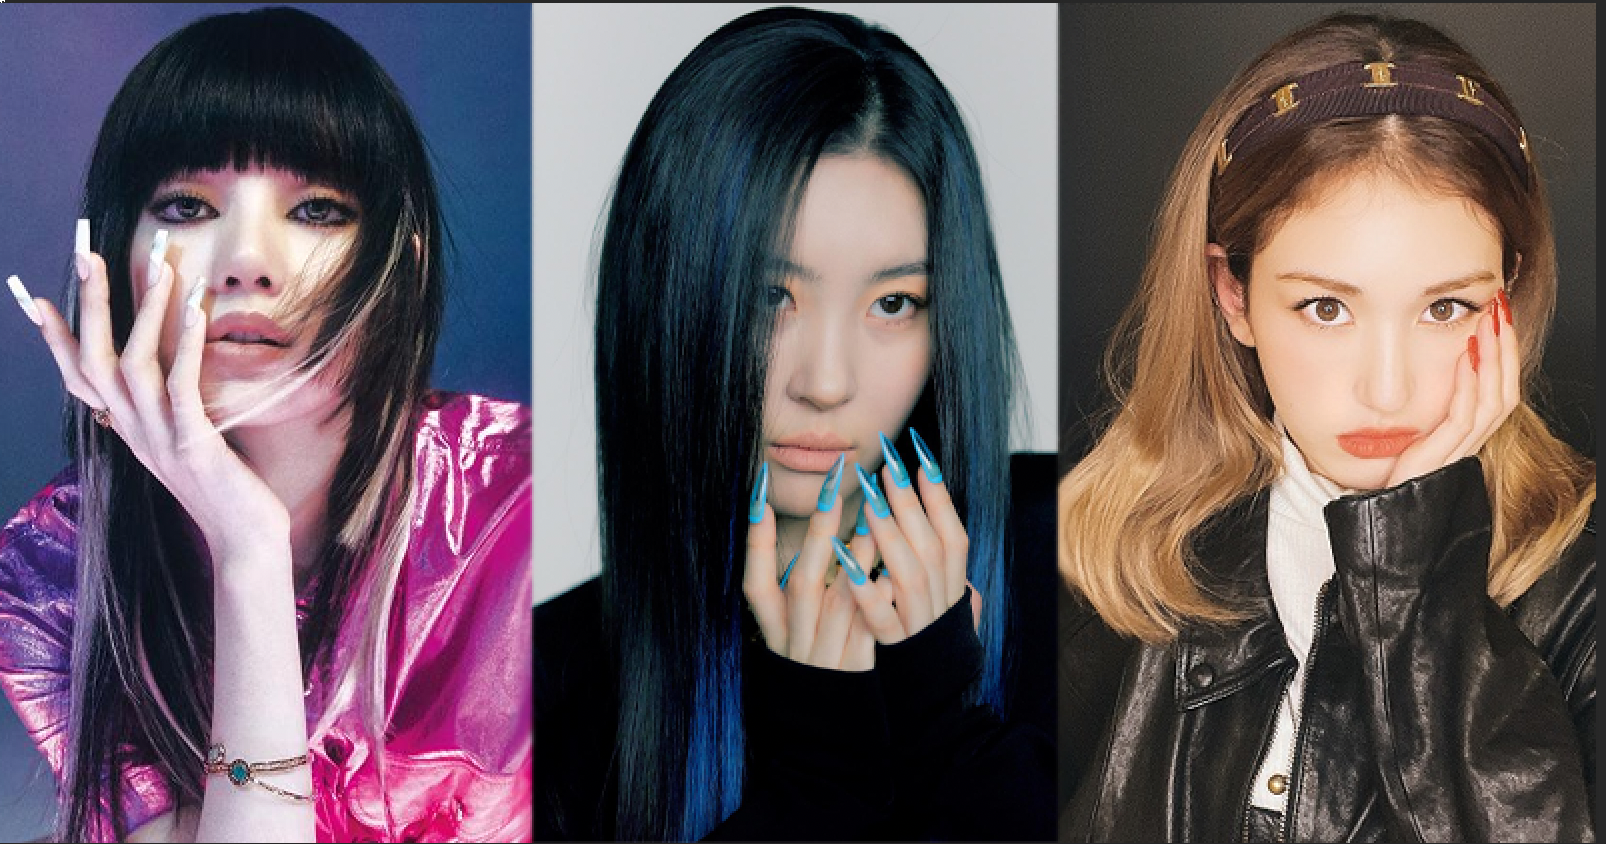 Lisa, Sunmi, Somi and More - Who Will Be The Hottest Female Idols in August?